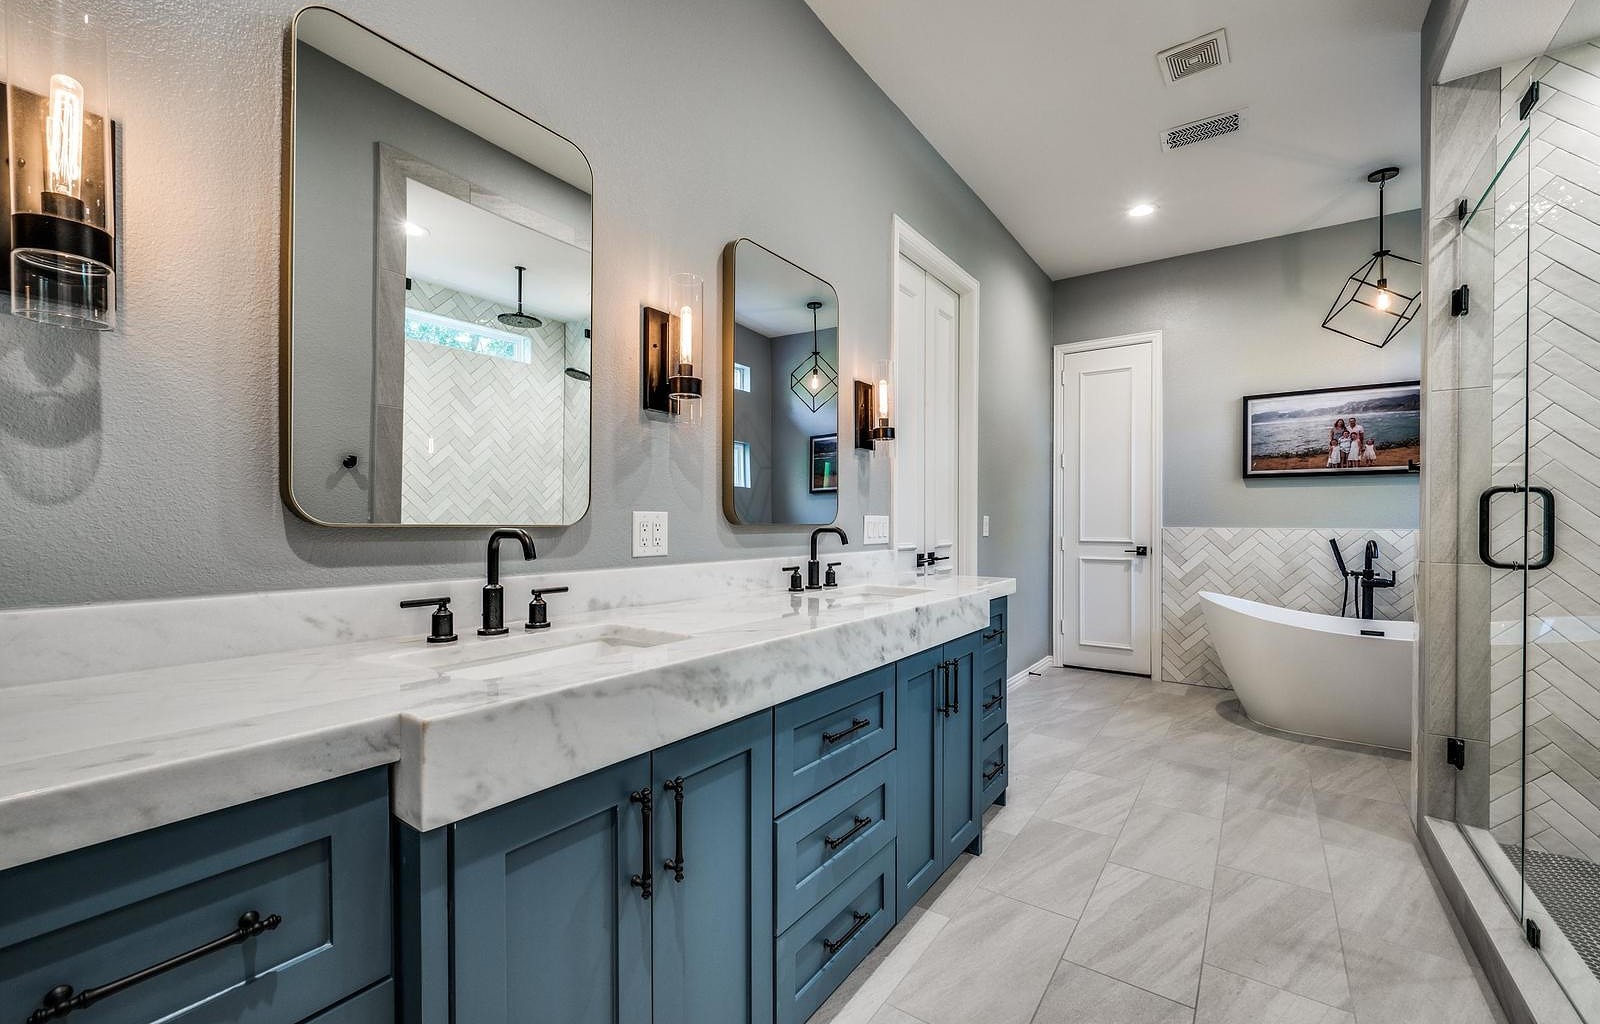 Home Remodeling Projectby DFW Improved in Master Bathroom Remodel in McKinney, TX